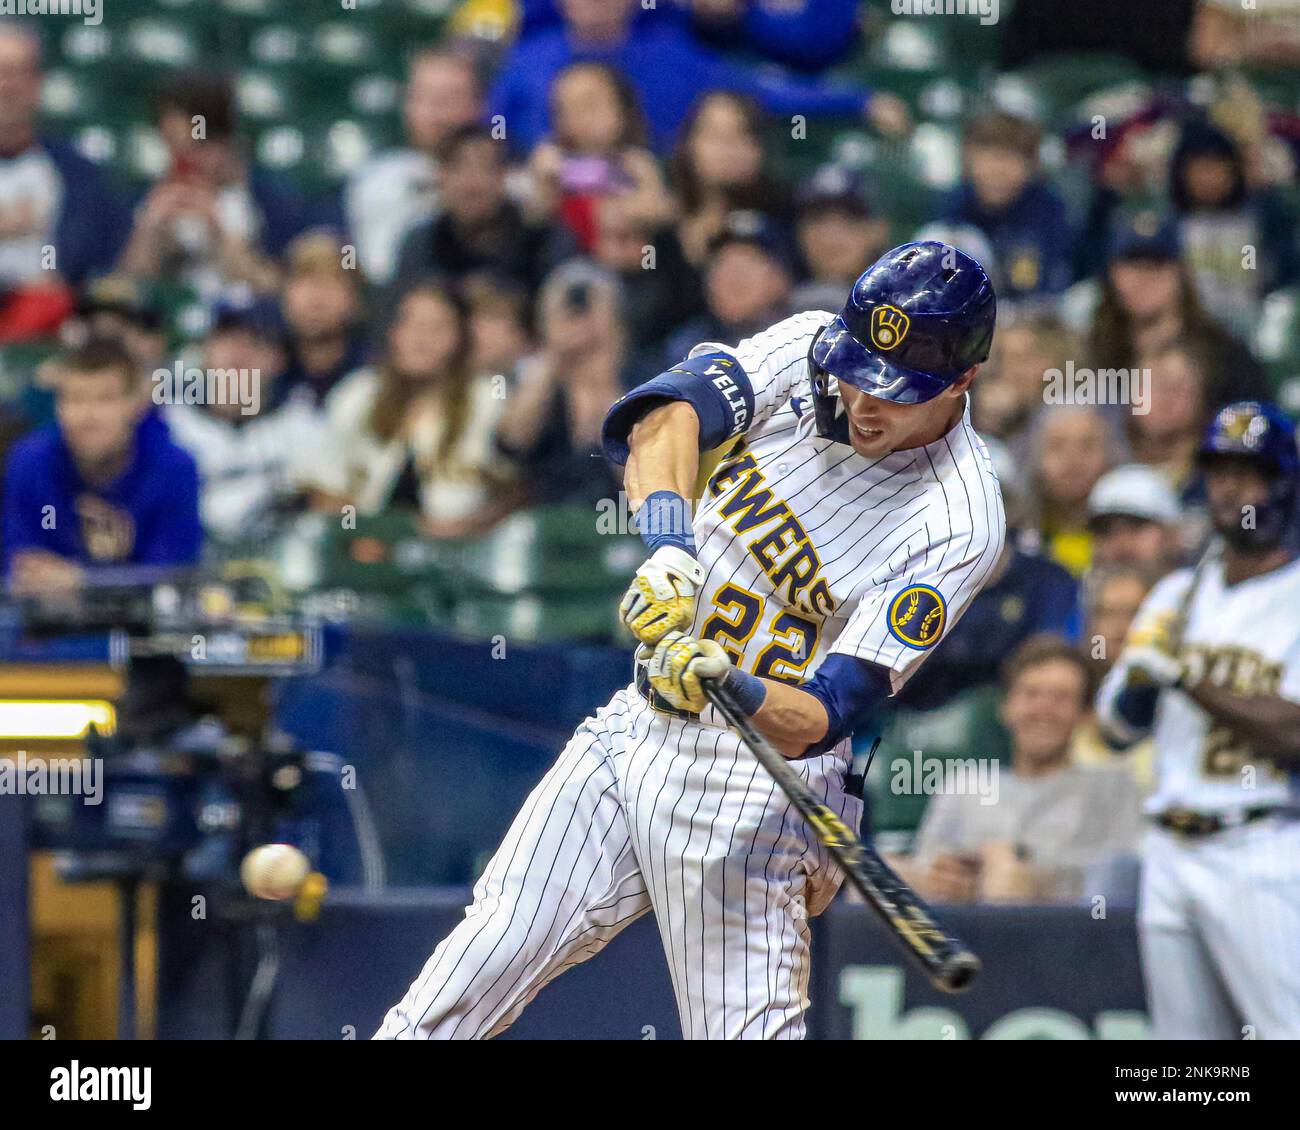 April 29, 2022 - Milwaukee Brewers first baseman Rowdy Tellez (11) stands  on second base after hitting a double during MLB Baseball action between  Chicago and Milwaukee at Miller Park in Milwaukee